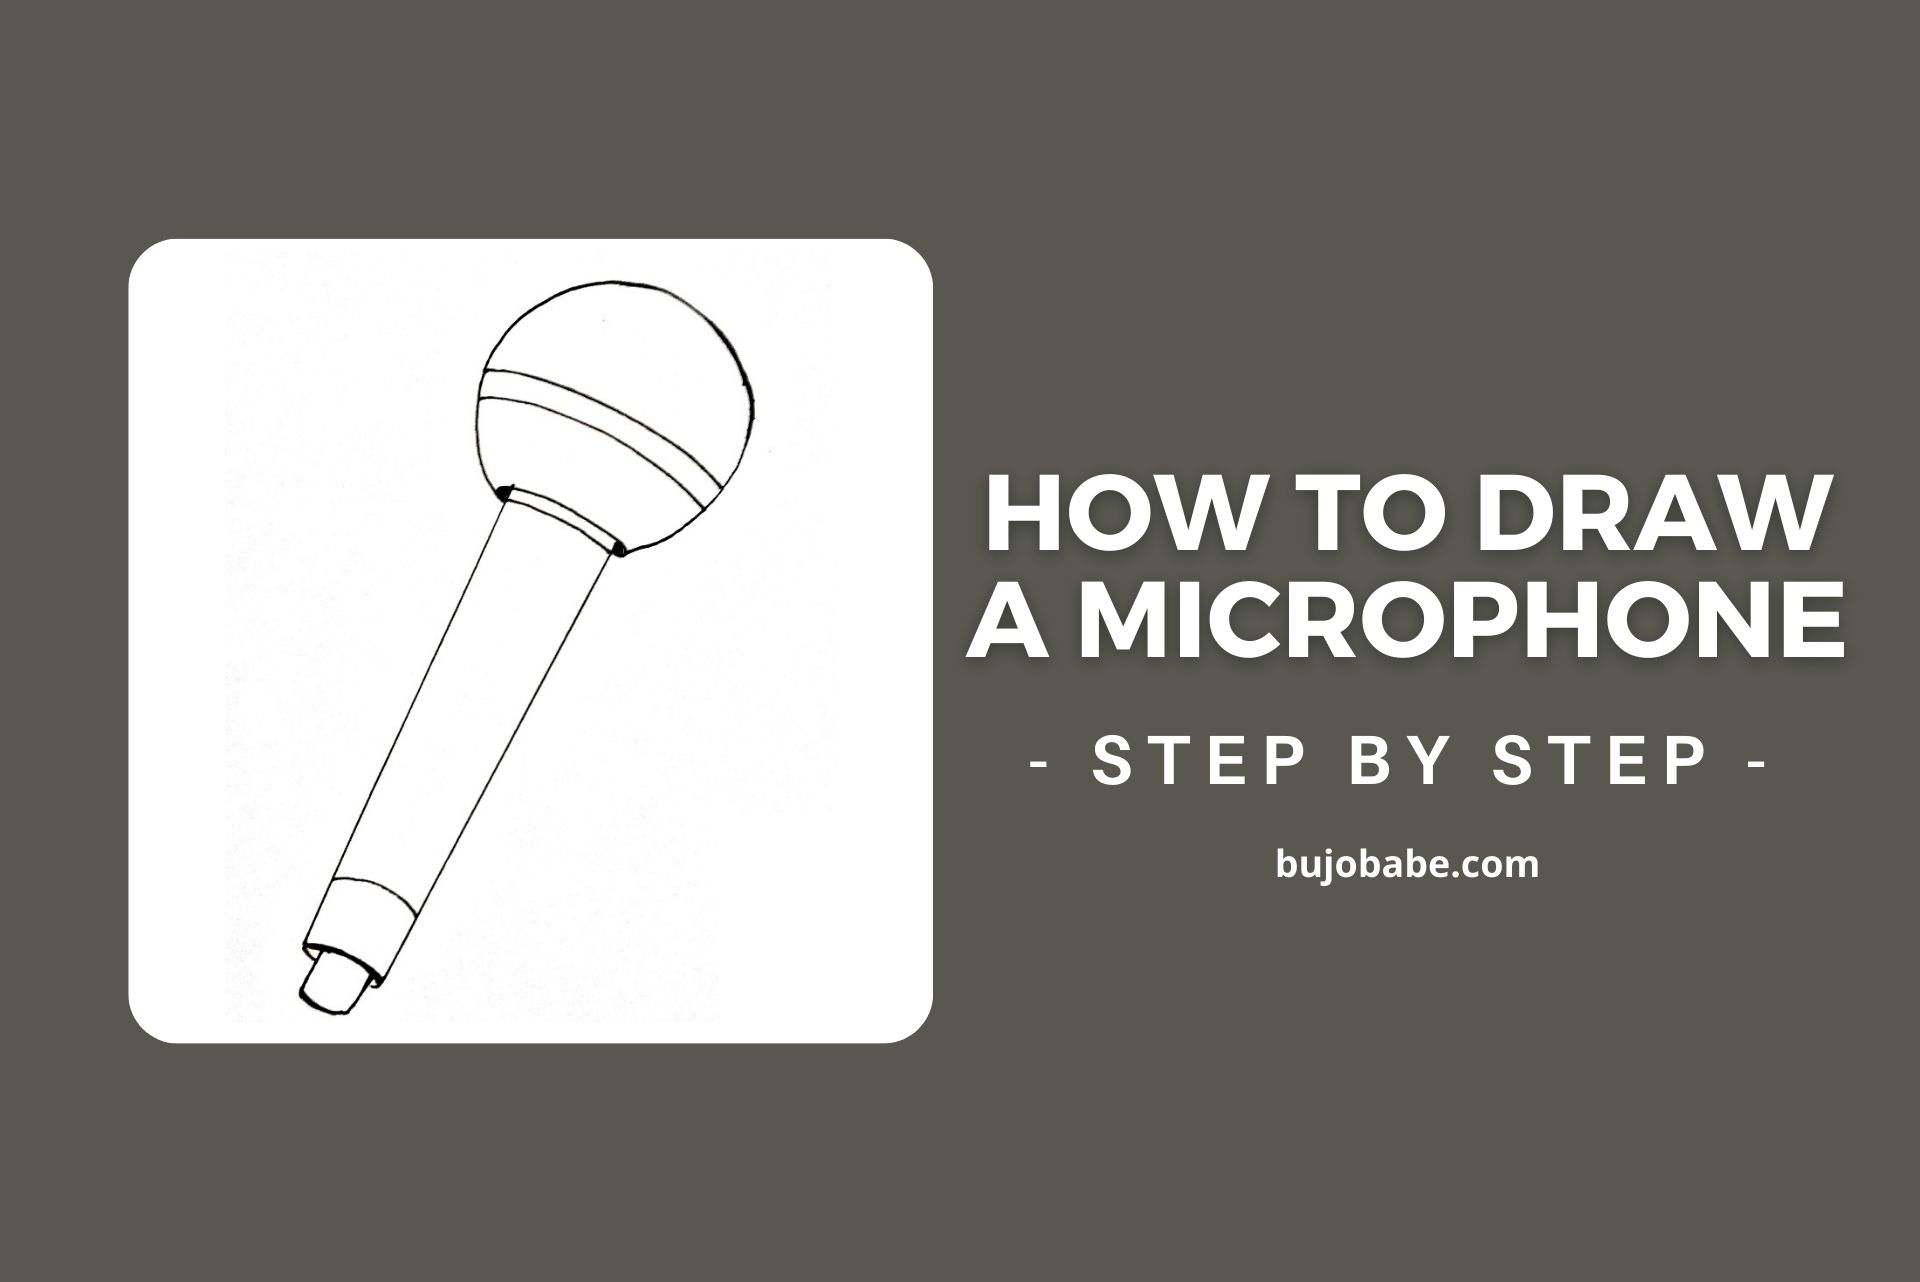 how to draw a microphone step by step